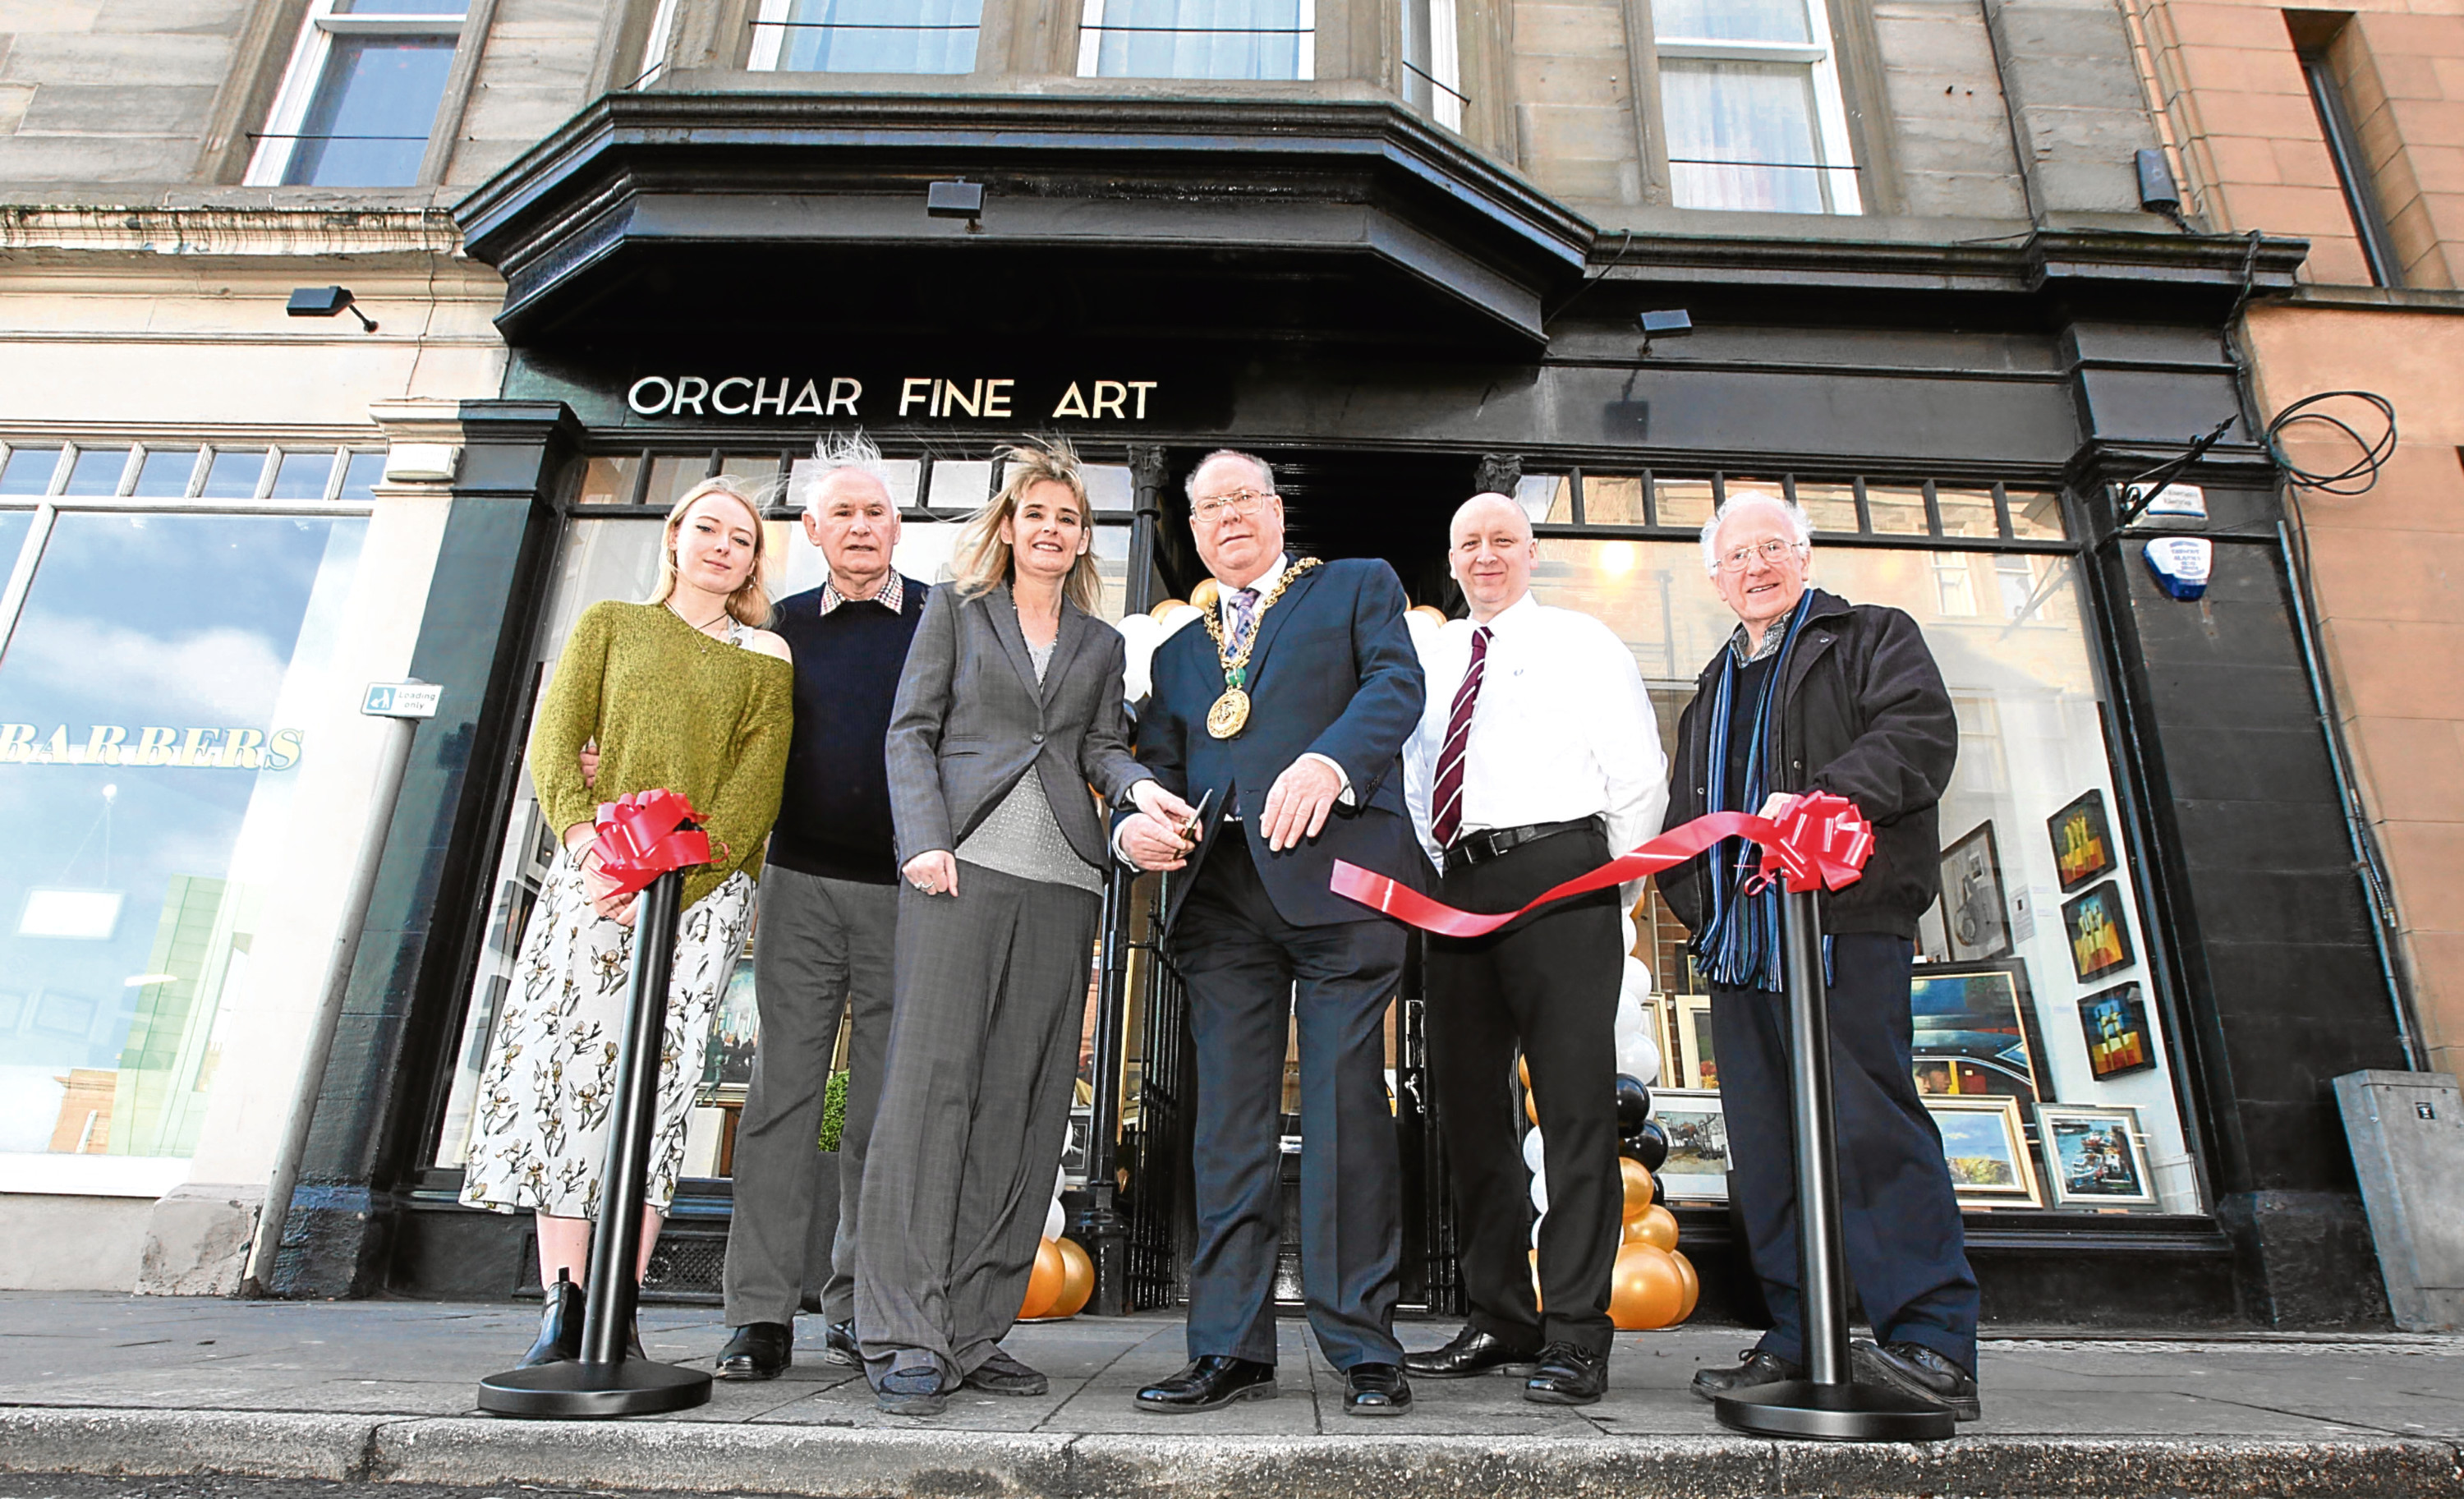 Lord Provost Bob Duncan opened the gallery in January.